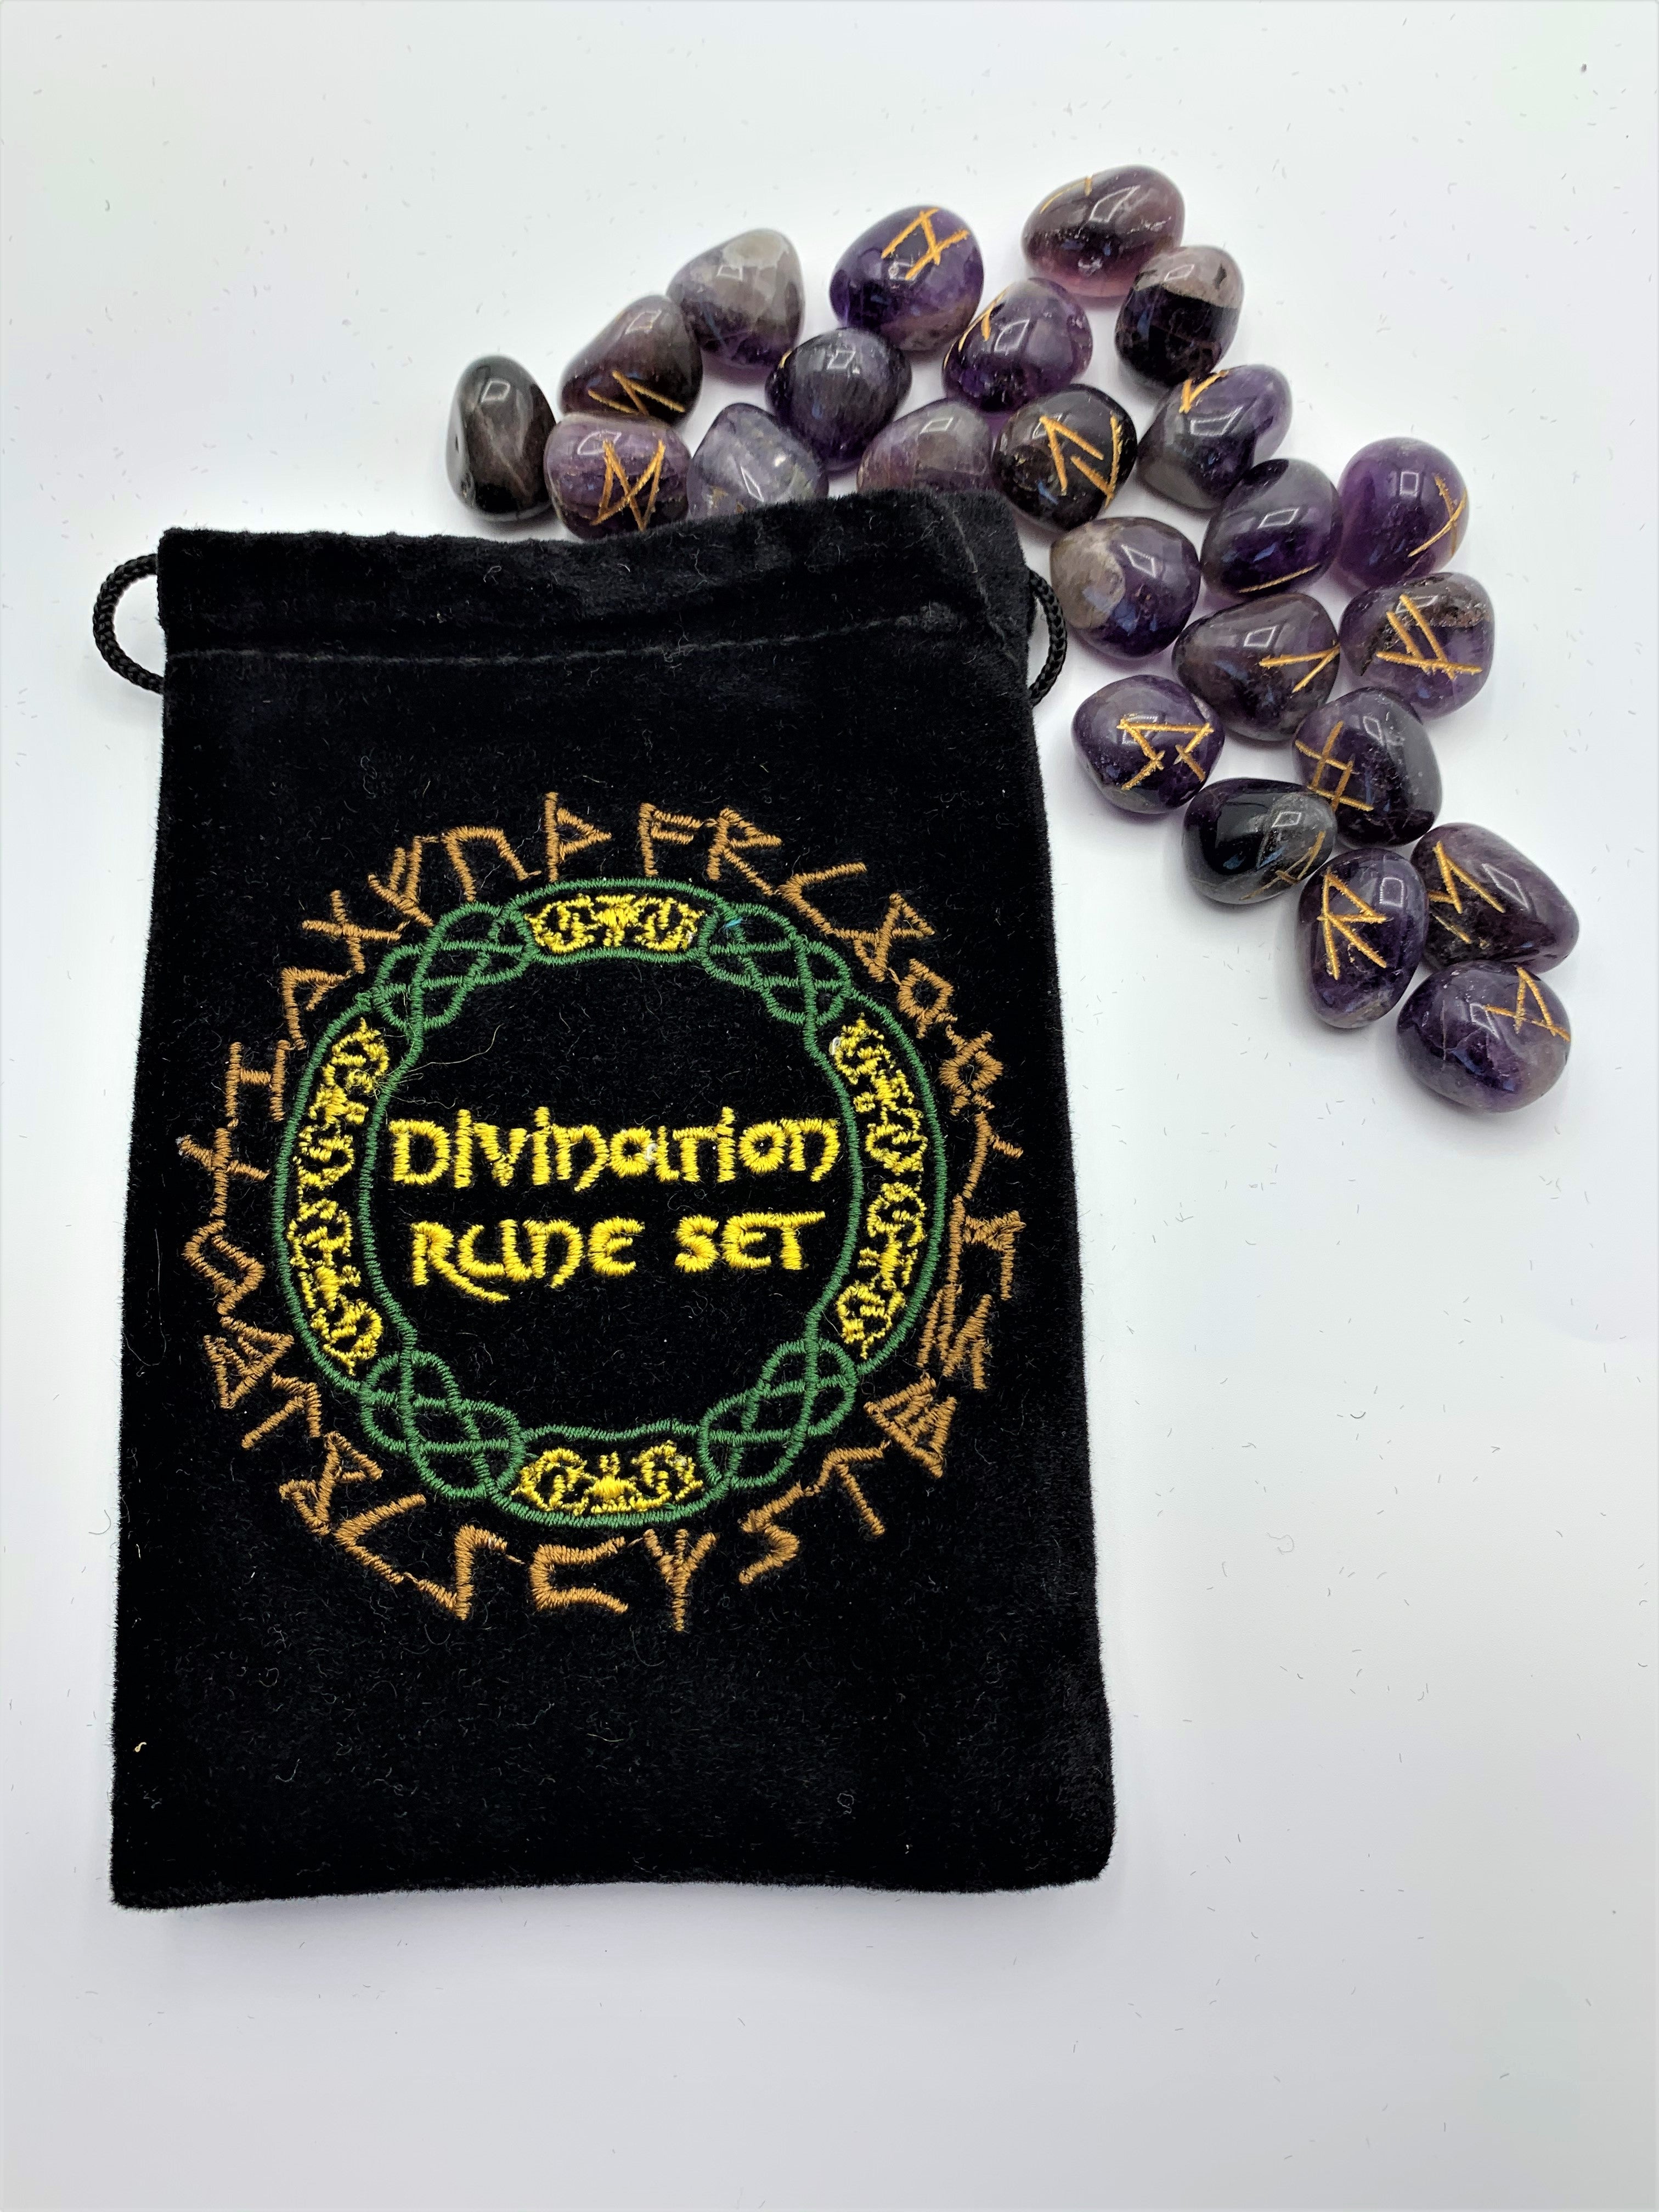 Close-up view of the amethyst Rune set with a runic symbol (in gold) on each stone. The set comes in a black bag embroidered on the front in green, yellow and light brown/gold with runic designs and the words "Divination Rune Set." Comes with a rolled up sheet of paper displaying each rune and its meaning.